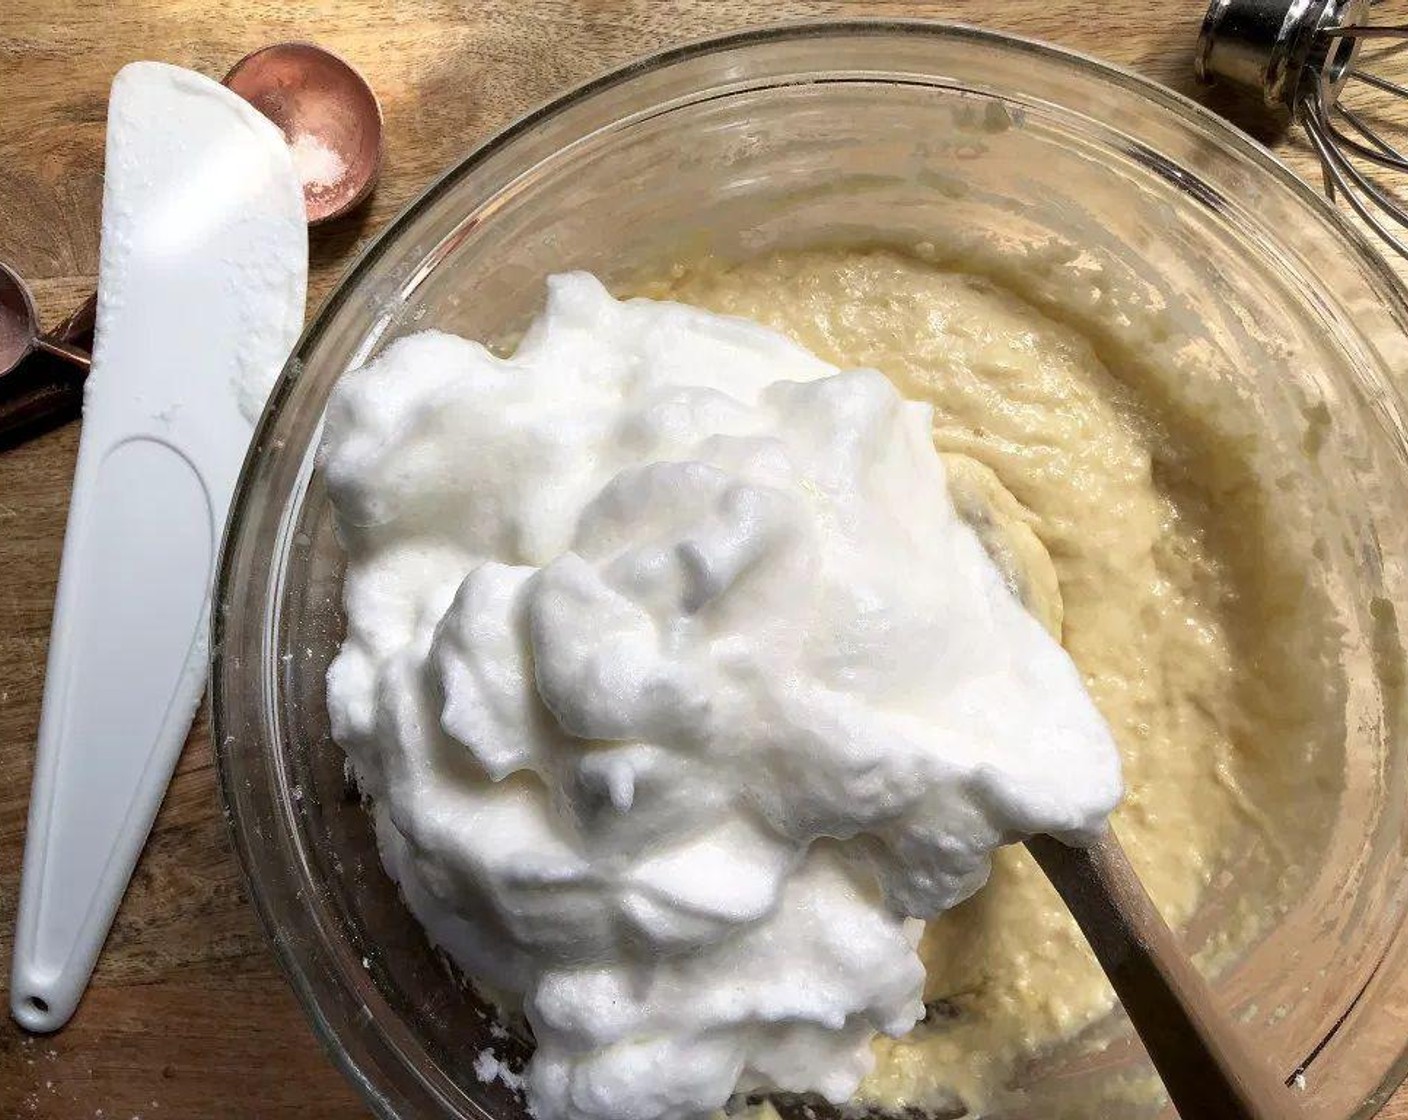 step 4 Place the egg whites into a clean bowl and beat with a wire whisk, or electric mixer, until stiff peaks form. Gently fold the beaten egg whites into the batter with a large spoon.